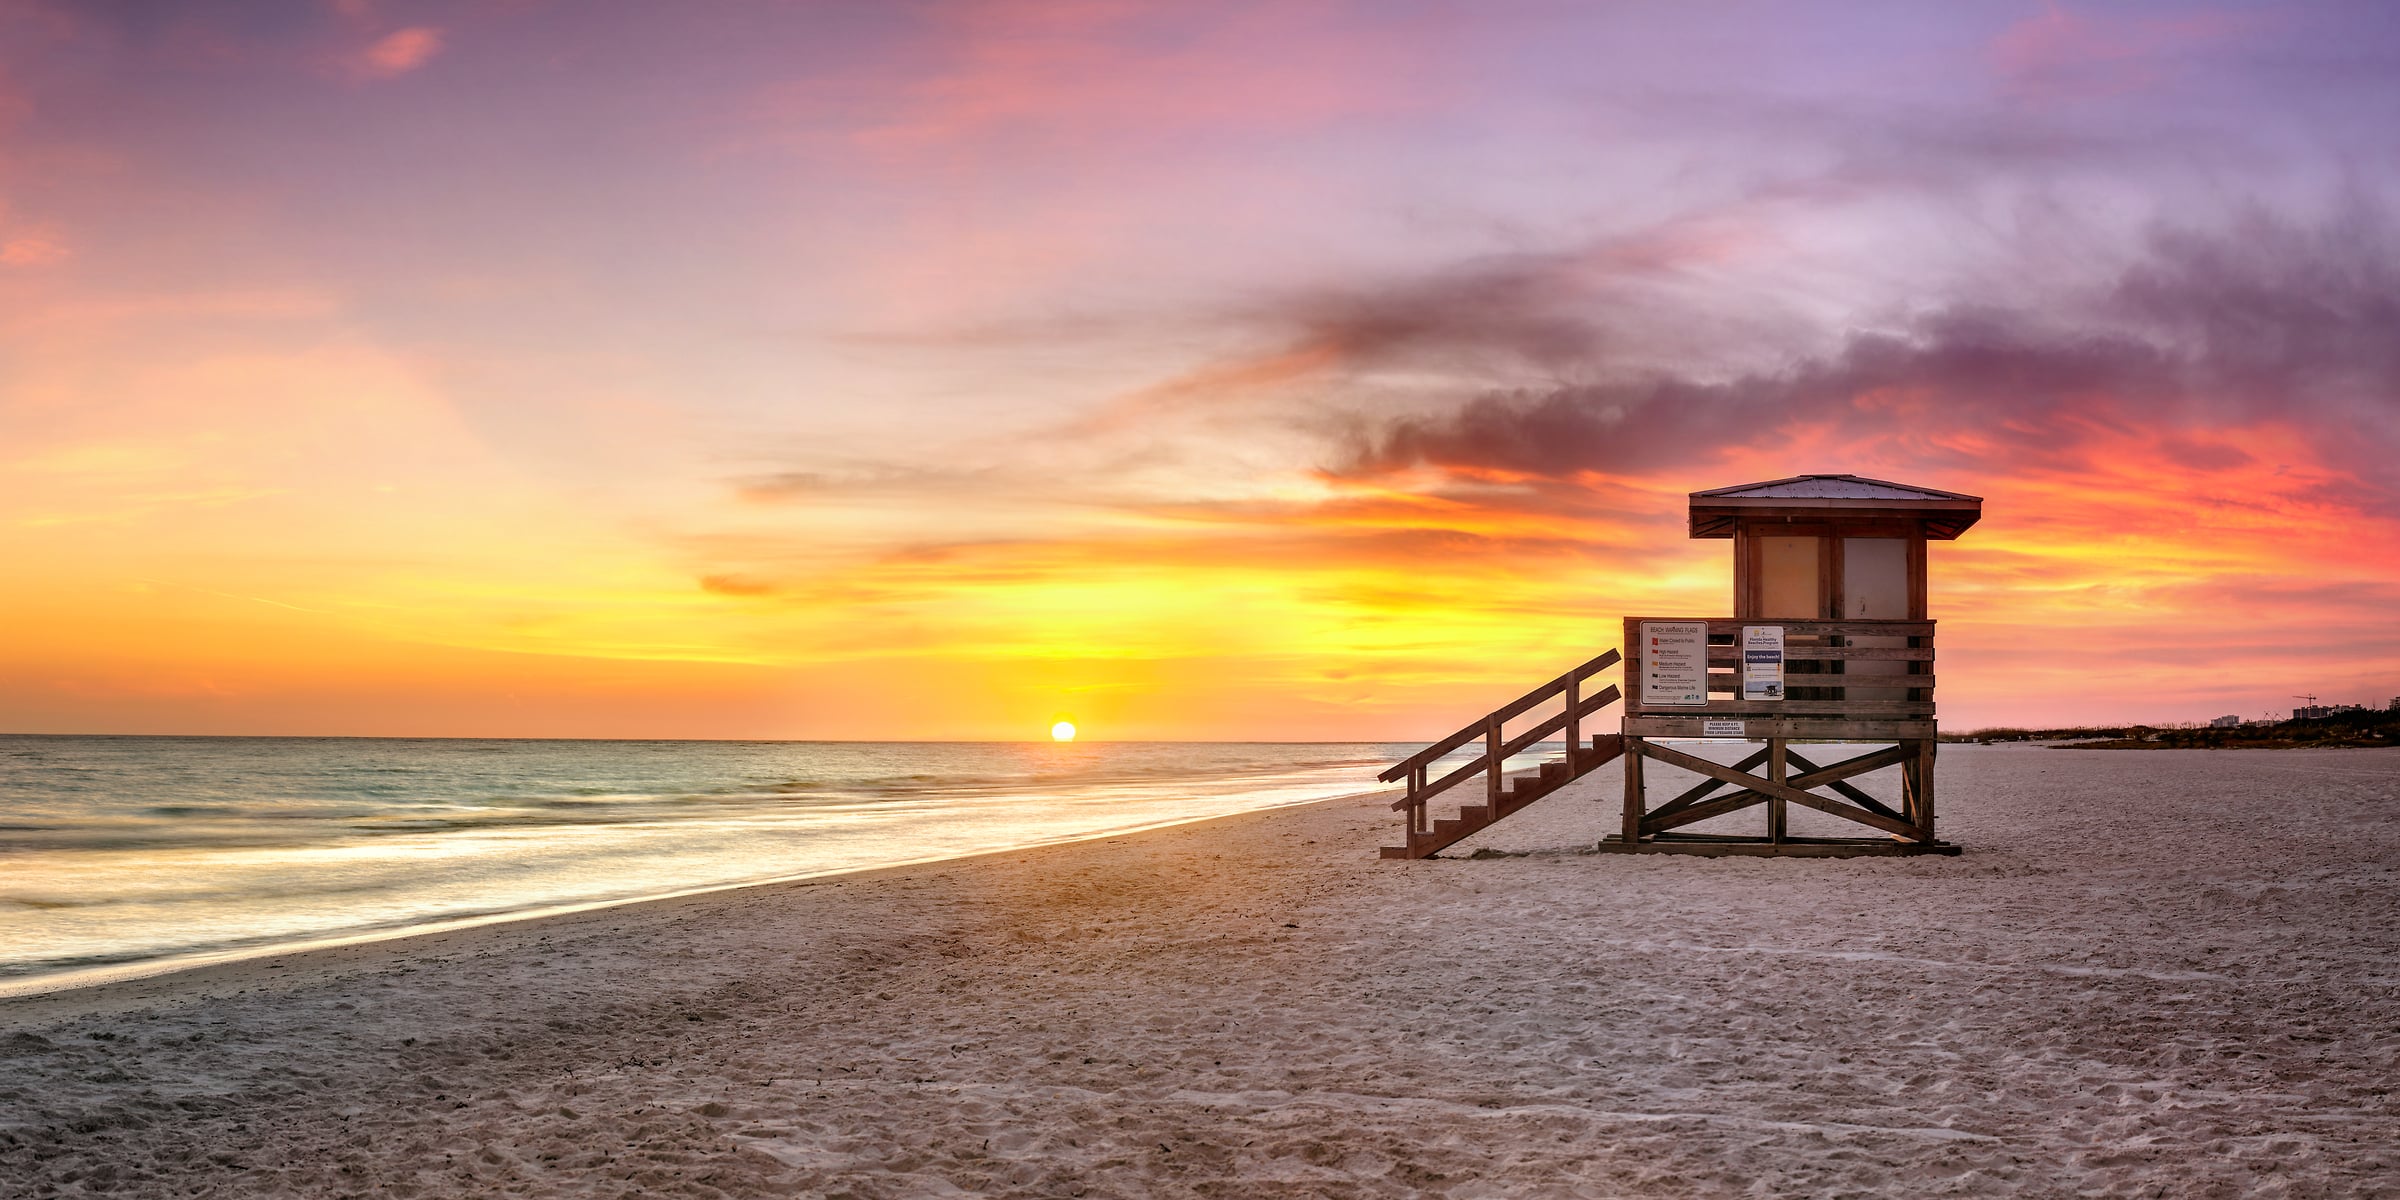 218 megapixels! A very high resolution, large-format VAST photo print of a Florida beach at sunset with a lifeguard stand; photograph created by Phil Crawshay in Lido Beach, Sarasota, Florida